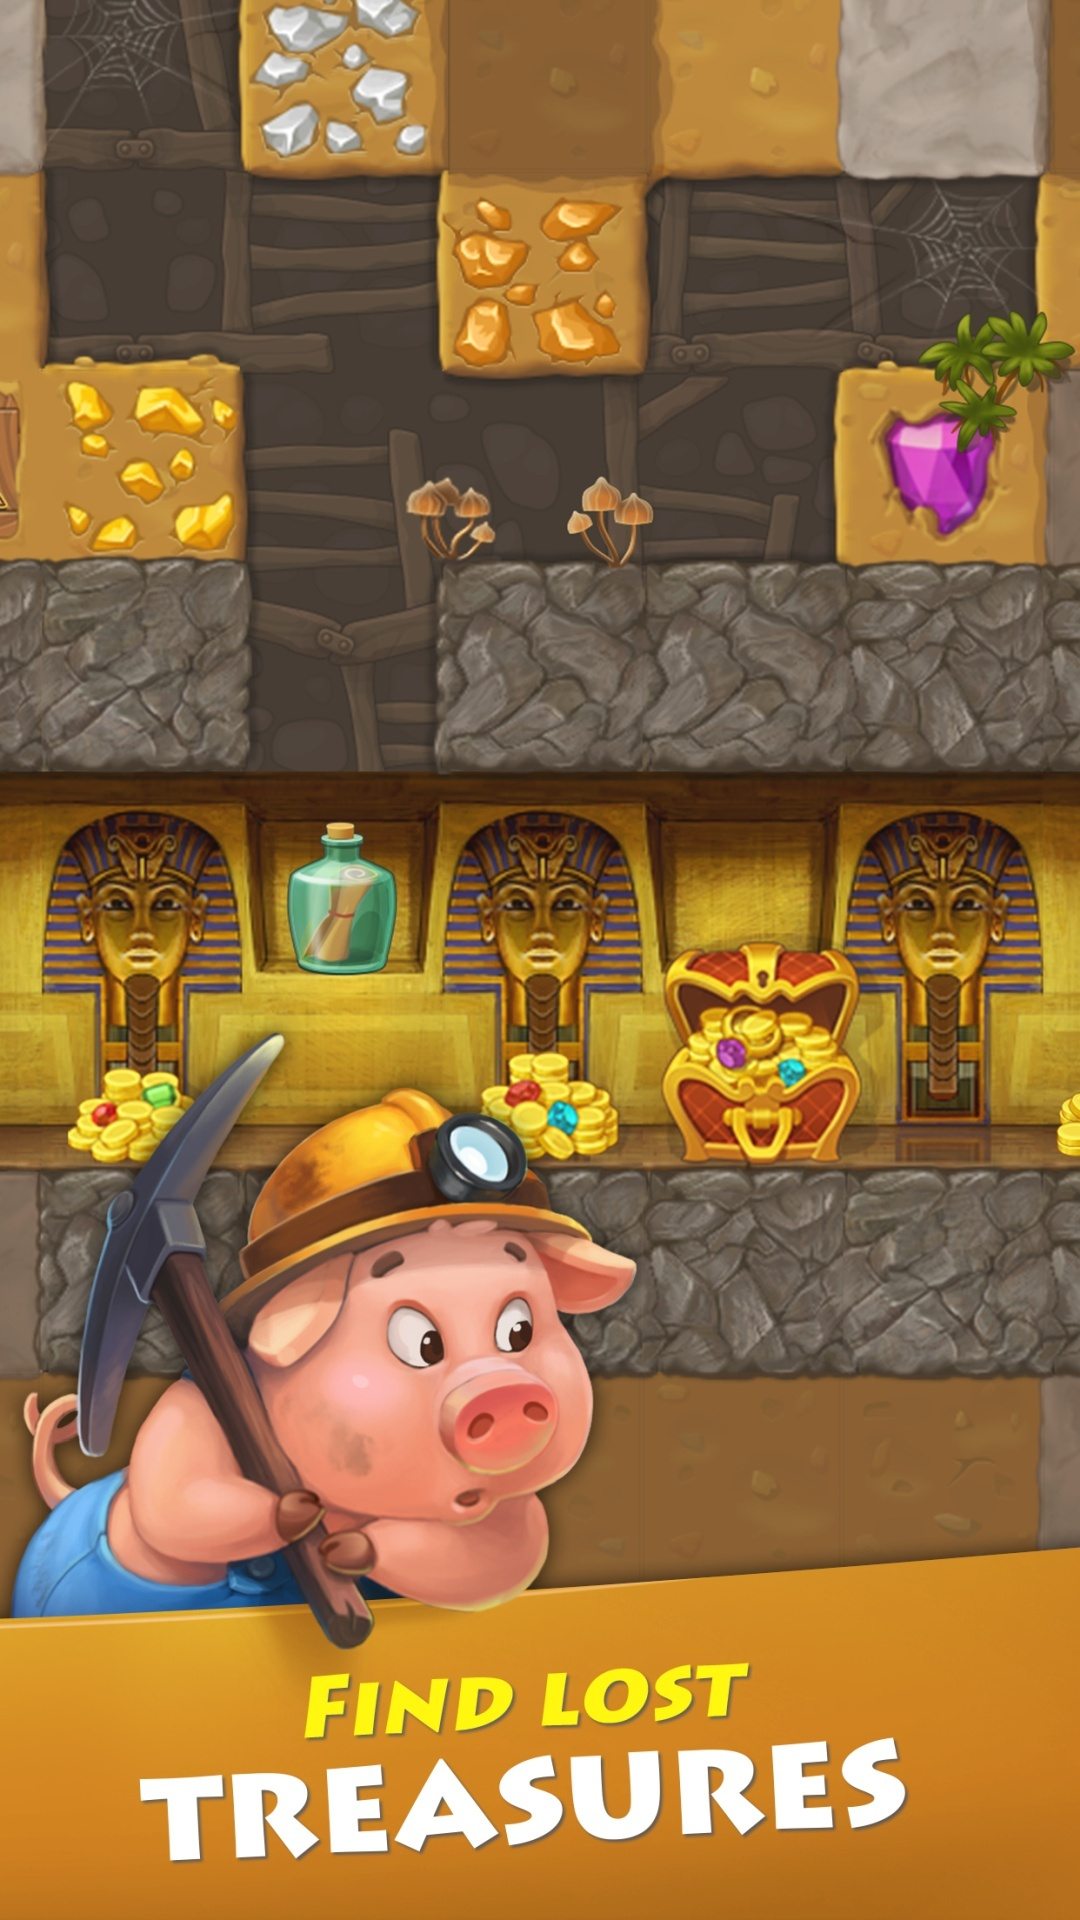 township apk download for android